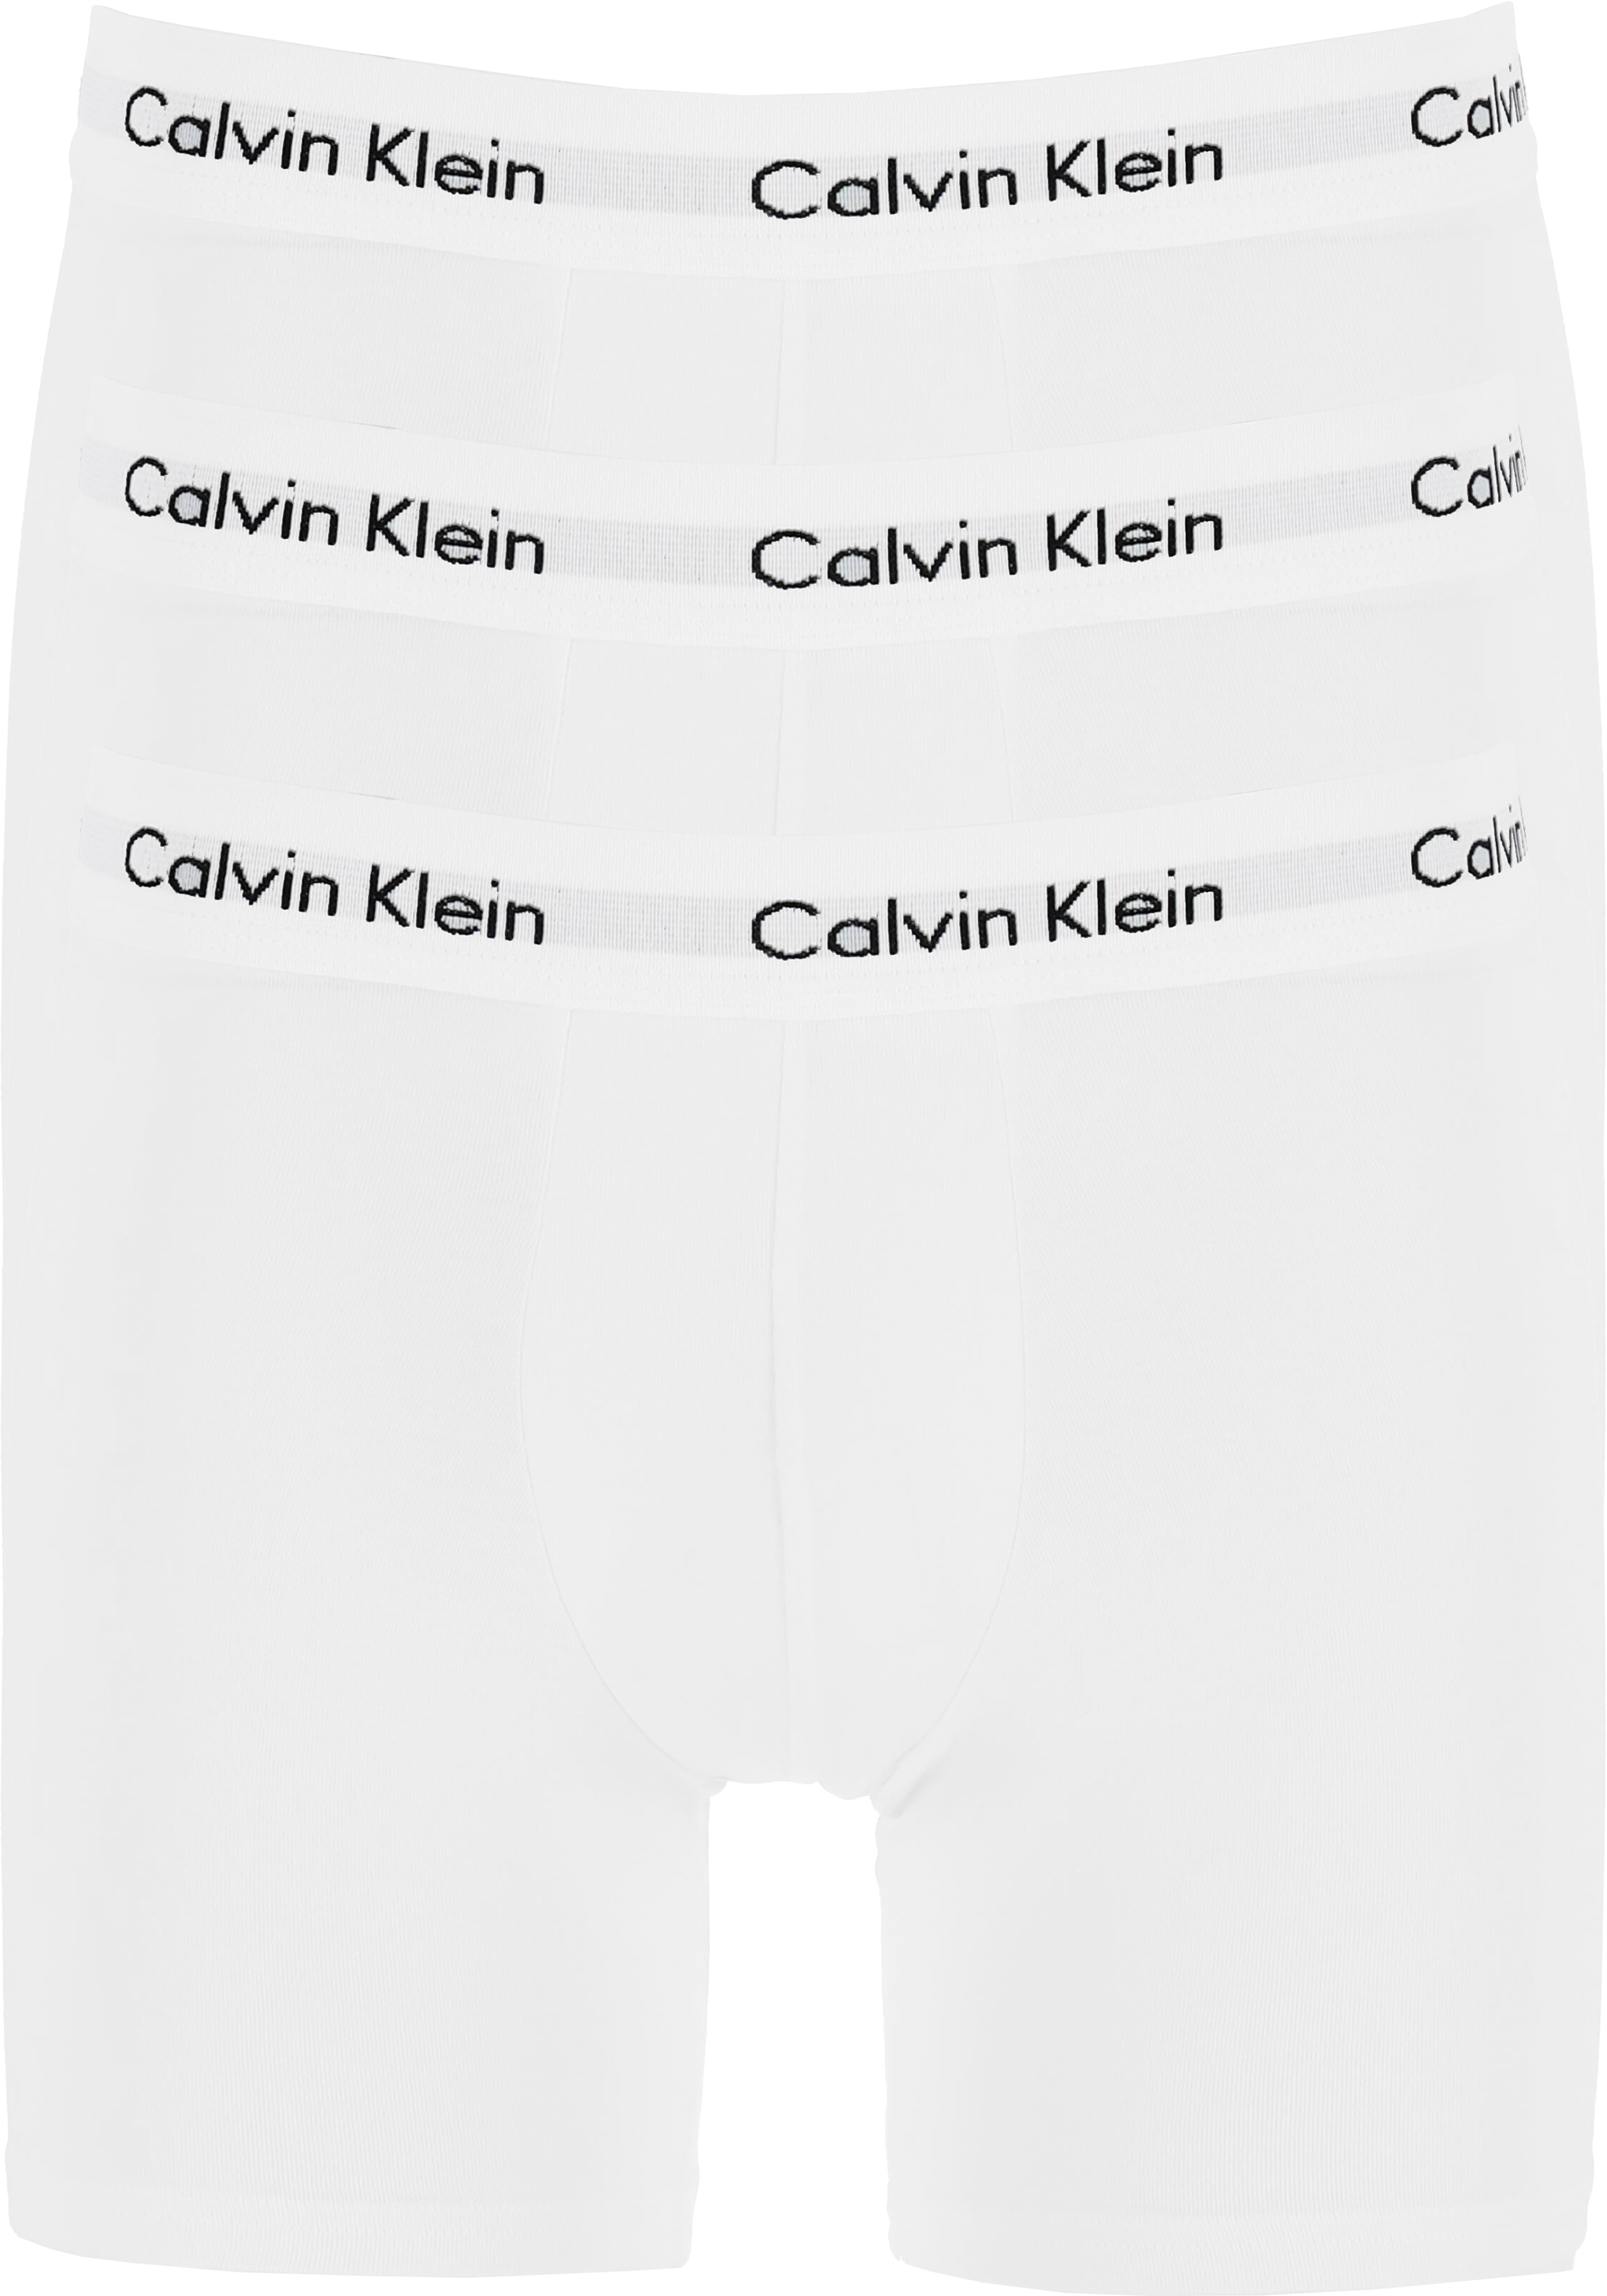 Calvin Klein Cotton Stretch boxer brief (3-pack), heren boxers extra lang, wit 